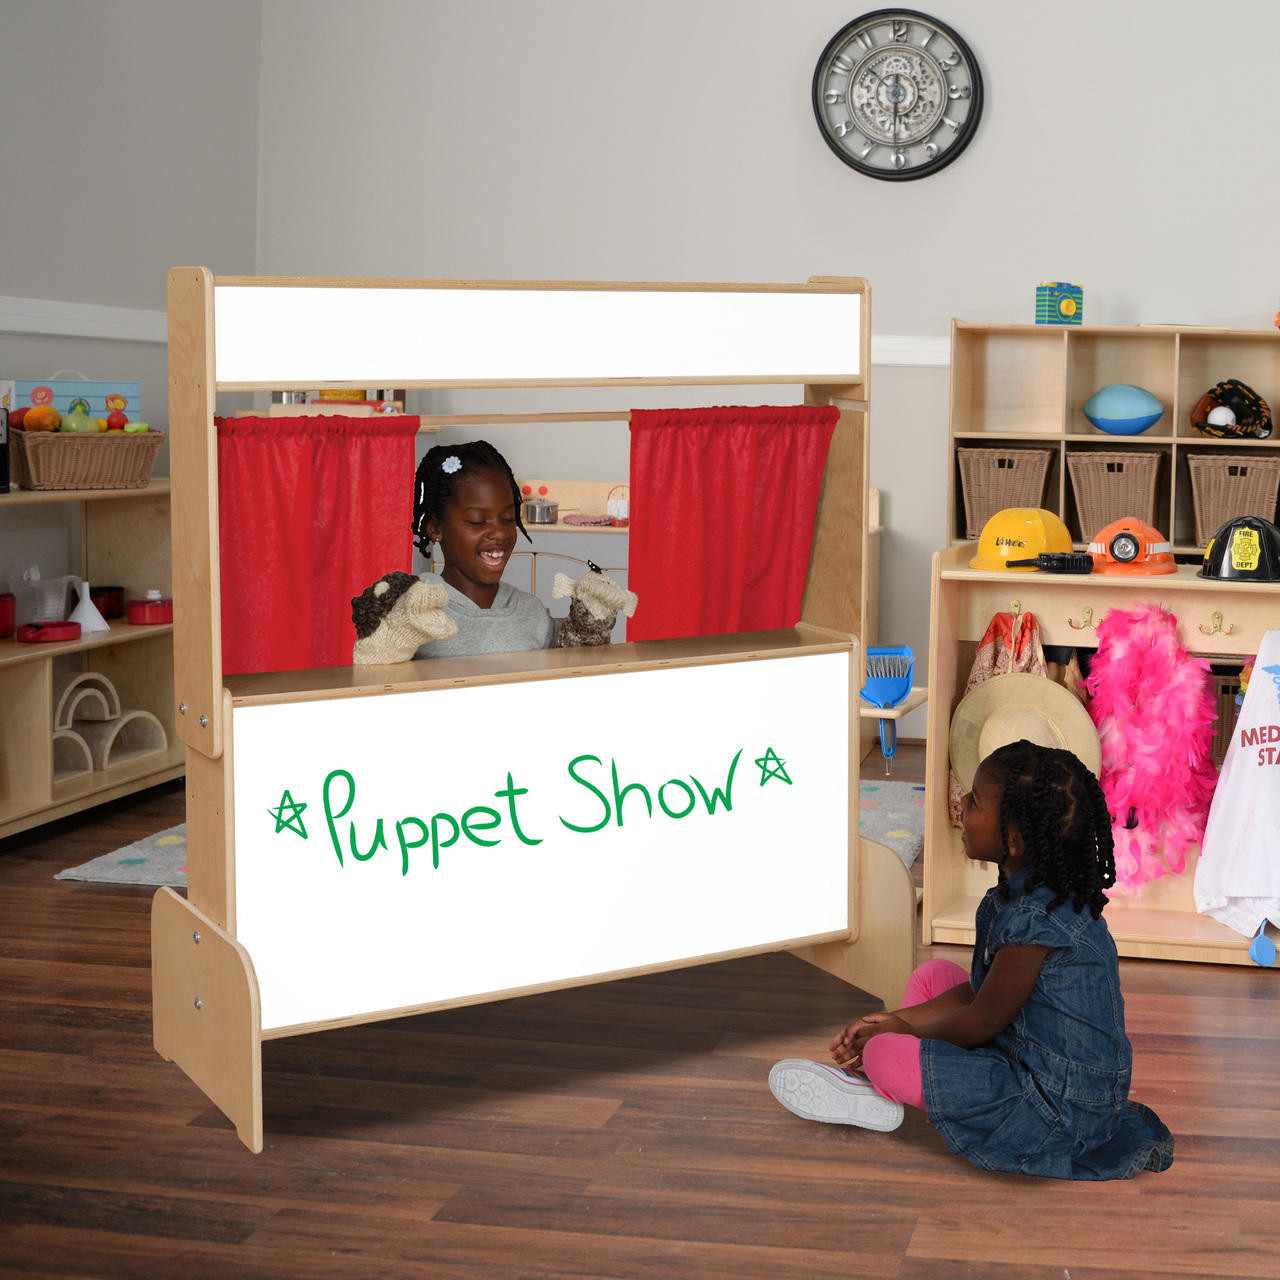 Wood Designs WD21651 Deluxe Puppet Theater with Marker Board, 48 x 47 x 6 (H x W x D)